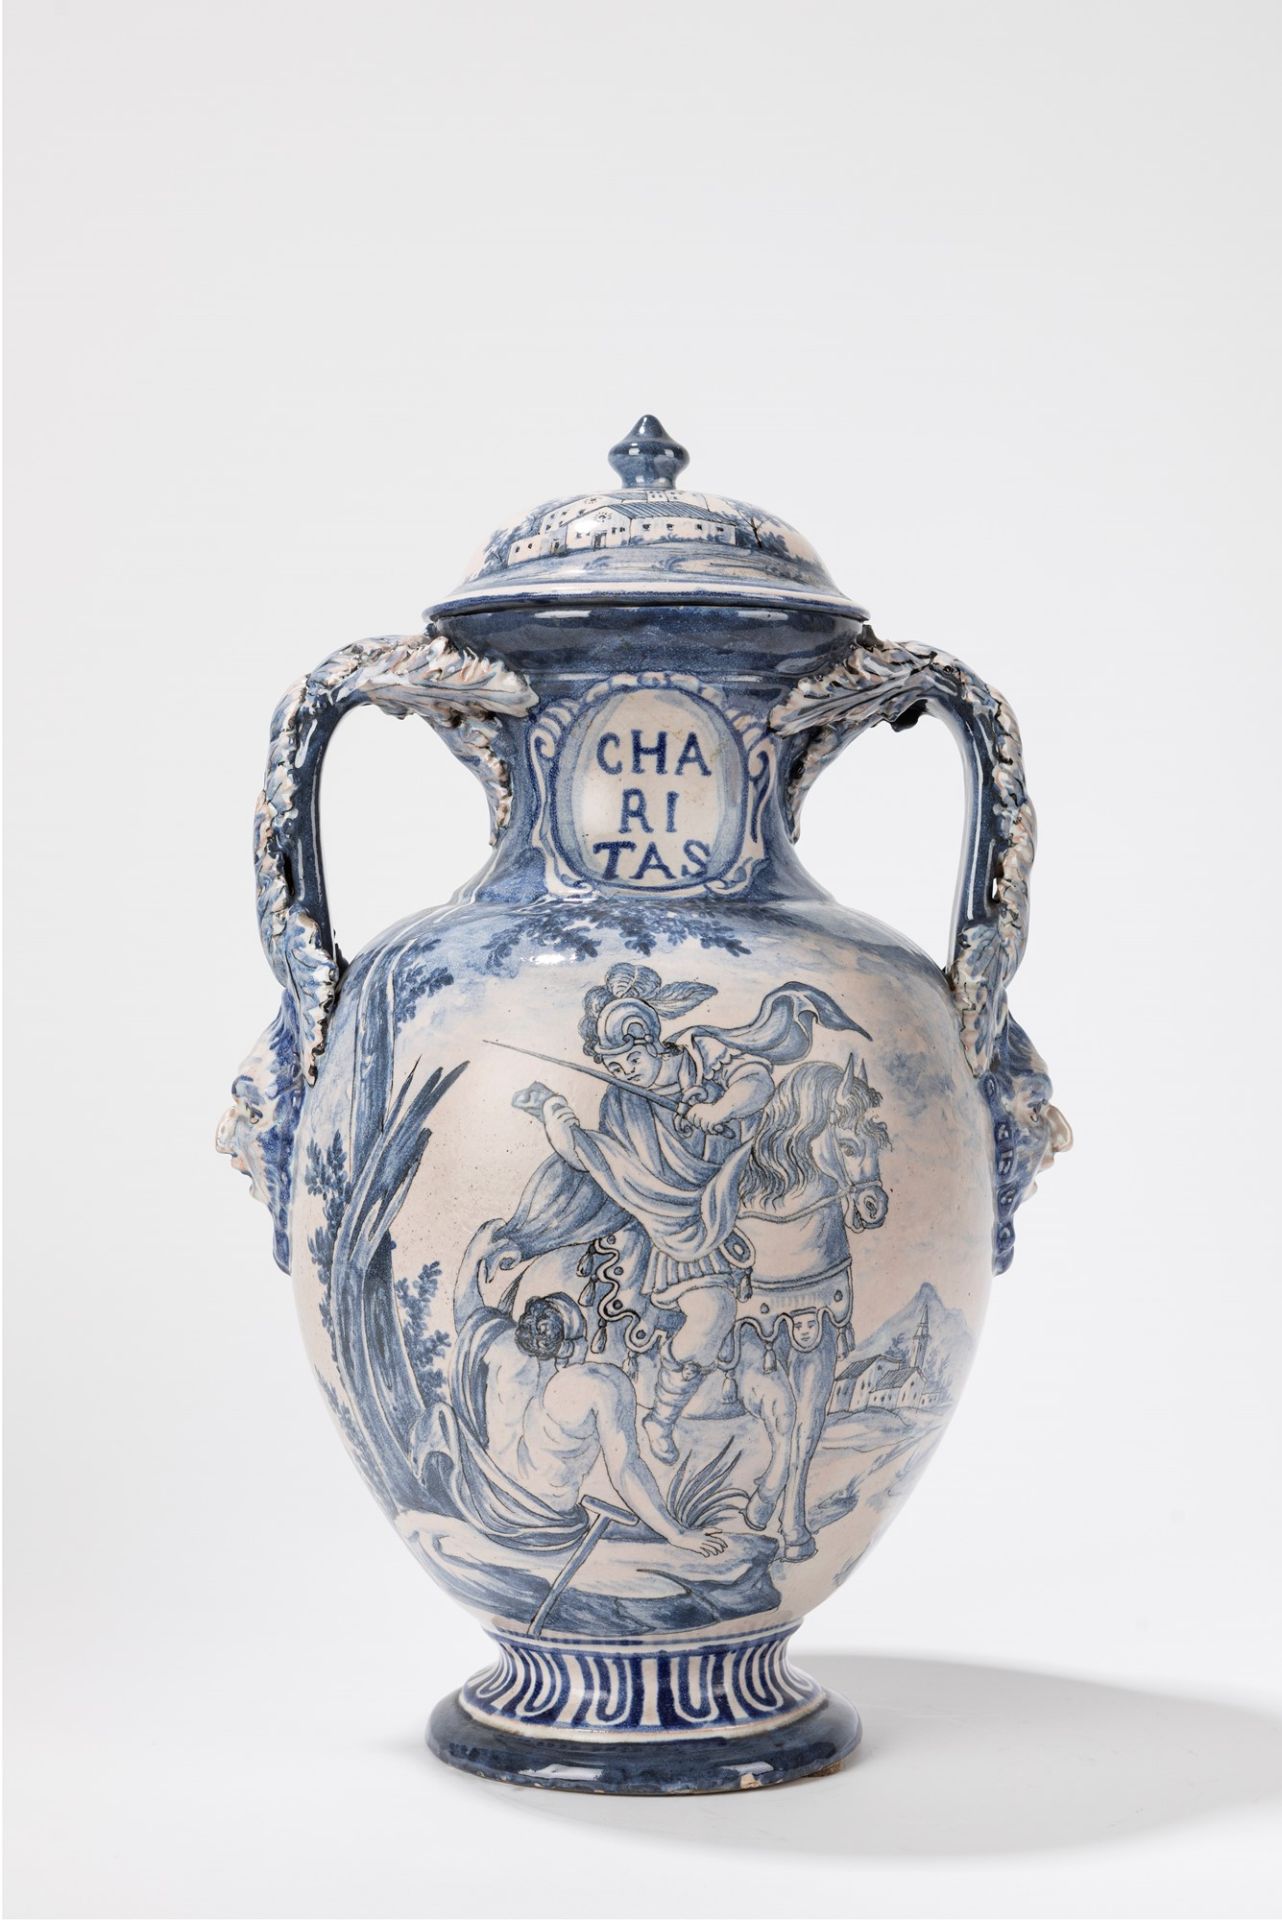 Two-handled vase in white and blue ceramic from Savona. 19th century - Image 2 of 2